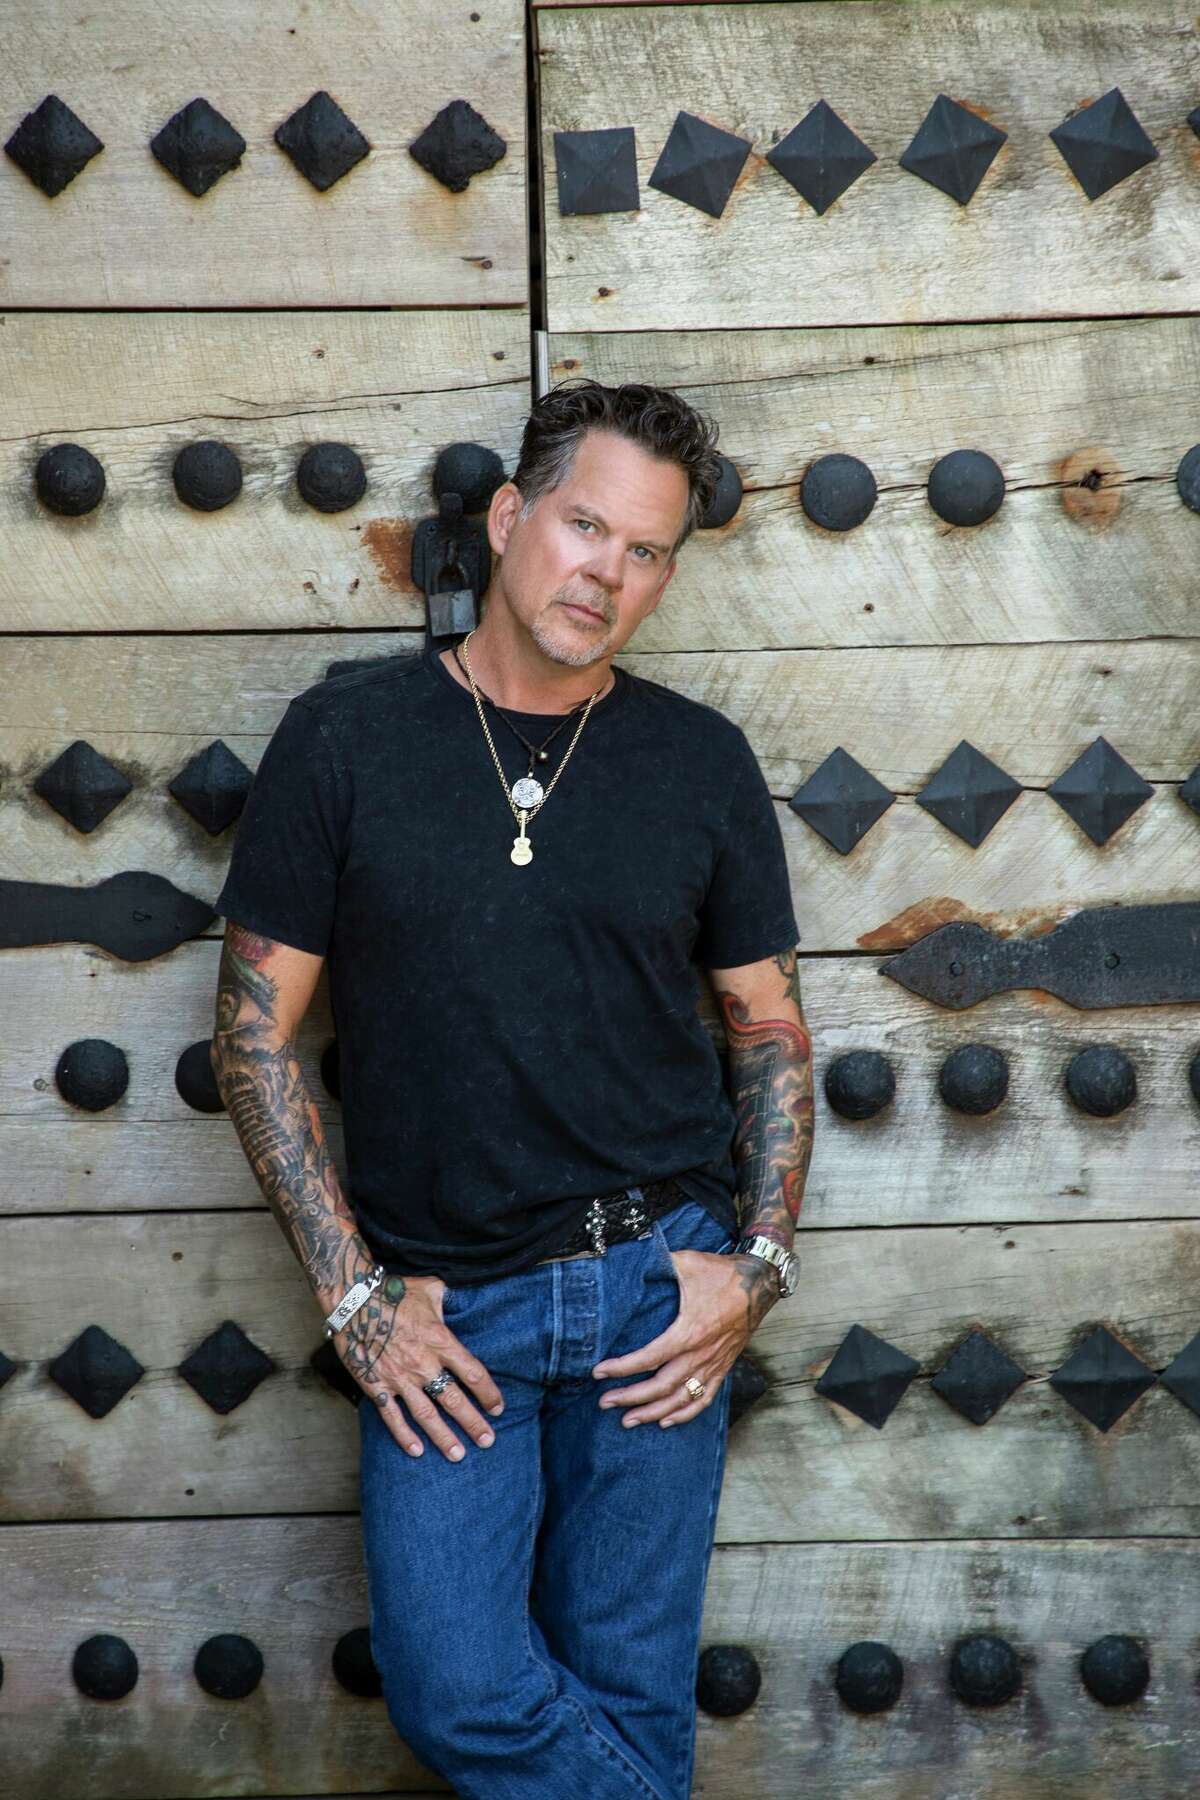 Country music star Gary Allan will perform at Floore's Country Store as part of his "Ruthless" tour.